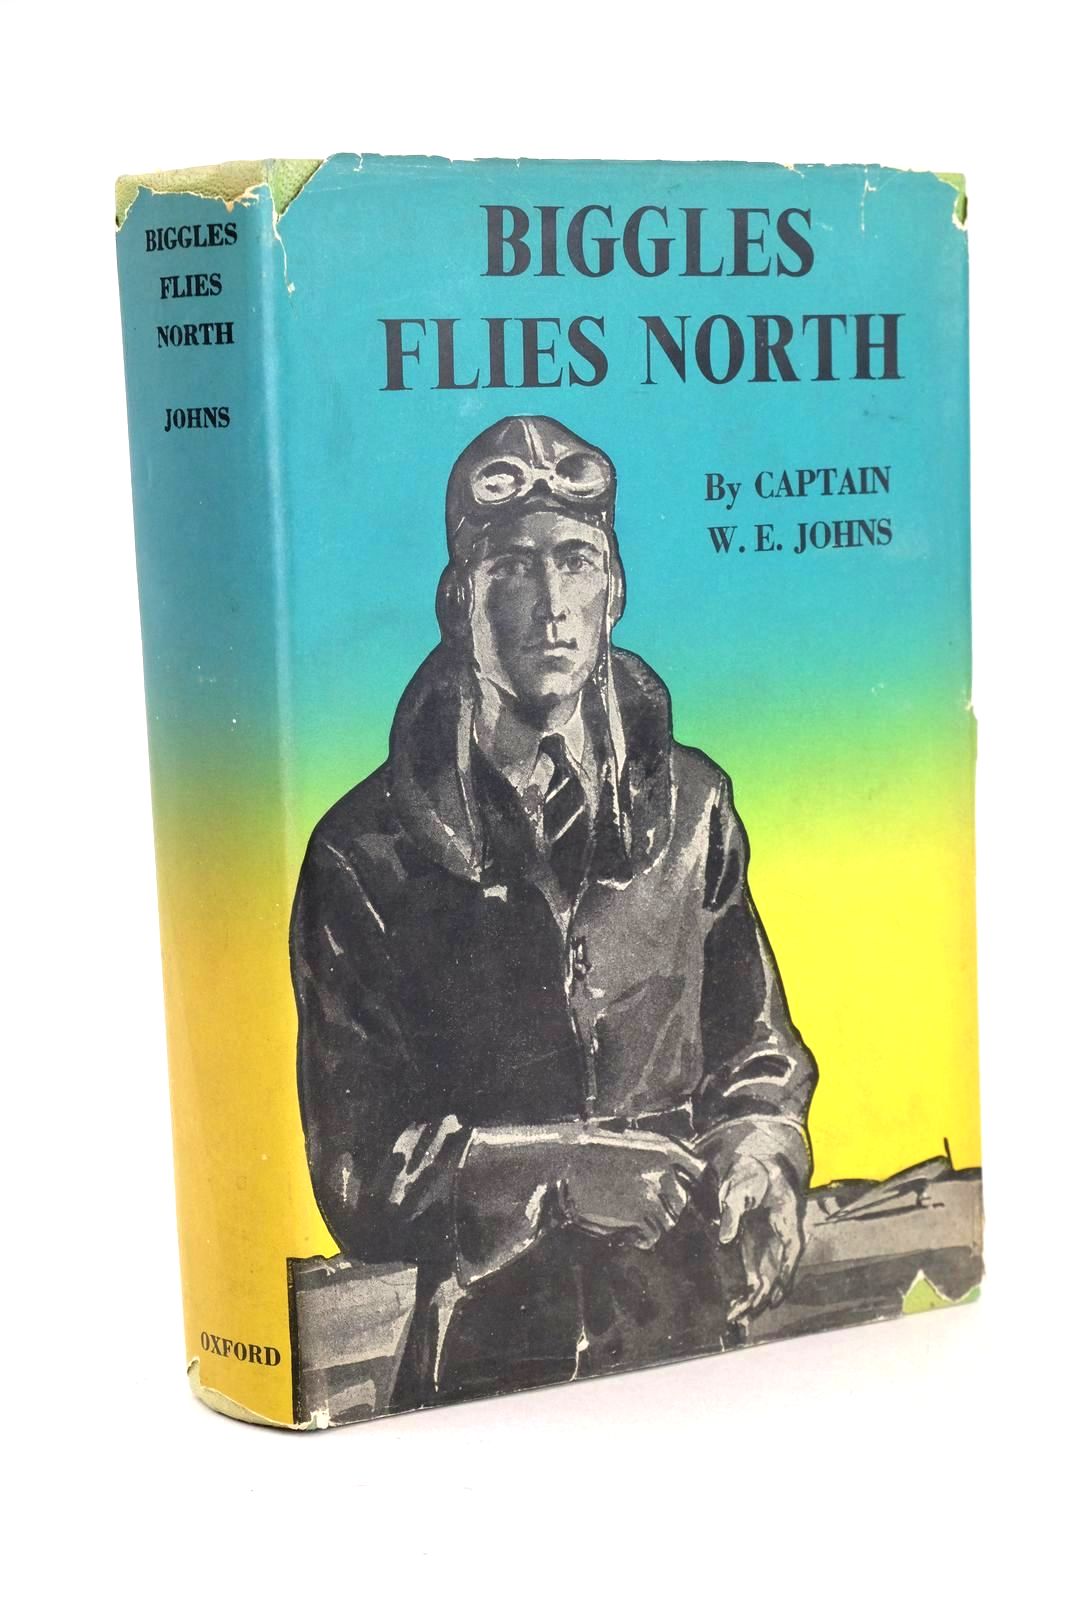 Photo of BIGGLES FLIES NORTH written by Johns, W.E. illustrated by Narraway, William published by Oxford University Press, Geoffrey Cumberlege (STOCK CODE: 1326428)  for sale by Stella & Rose's Books